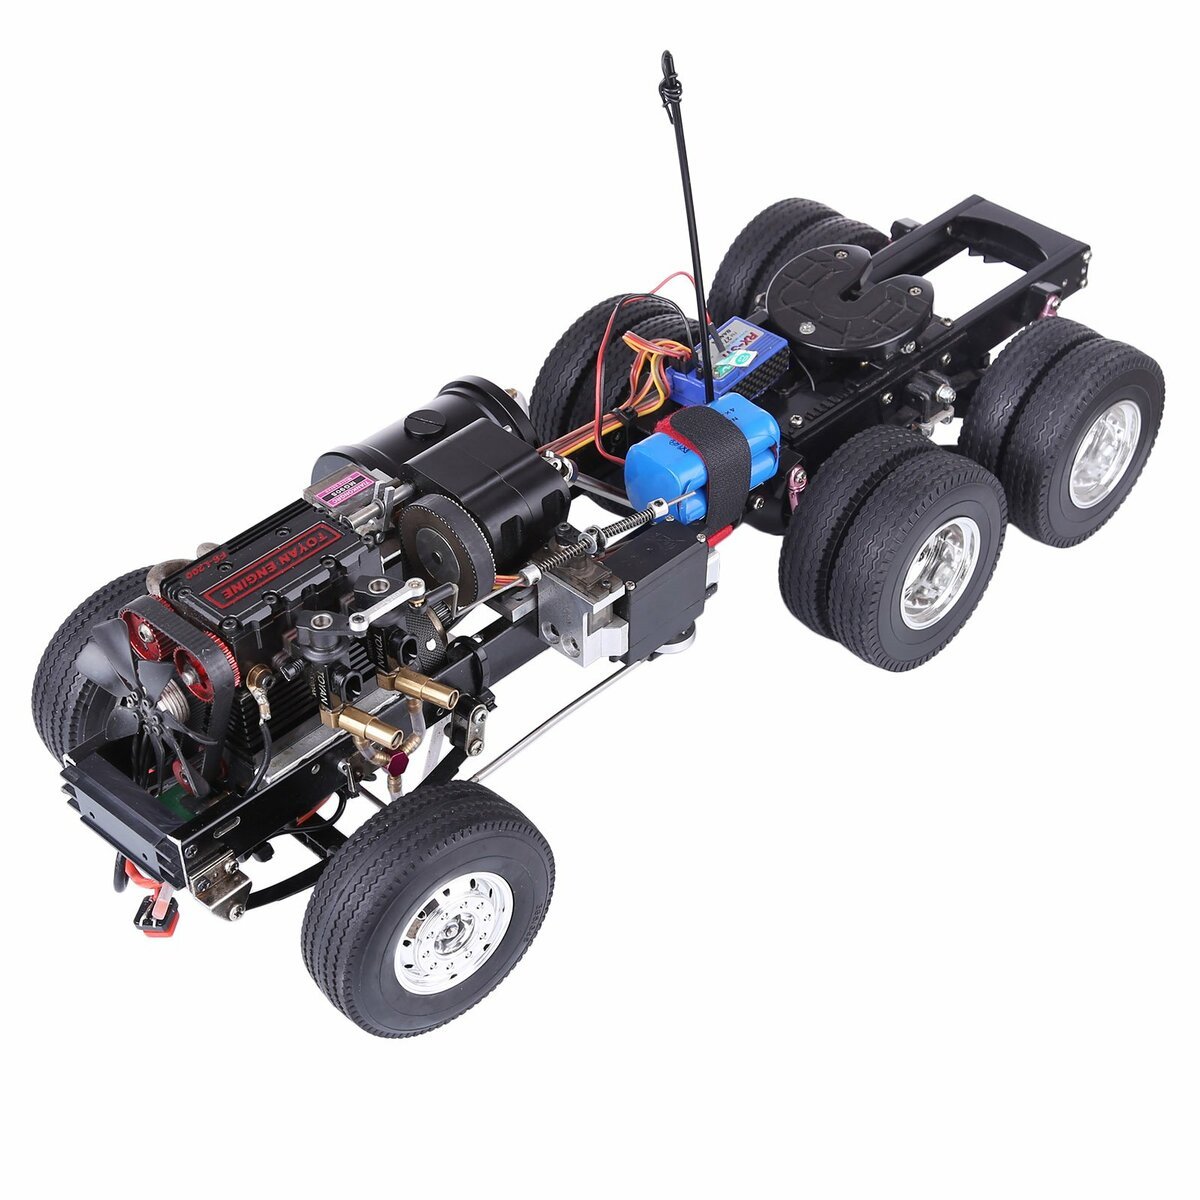 Toyan FS-S100A 4 Stroke RC Engine Methanol Engine Kit for RC Car Boat Plane  RC Vehicles Model Parts